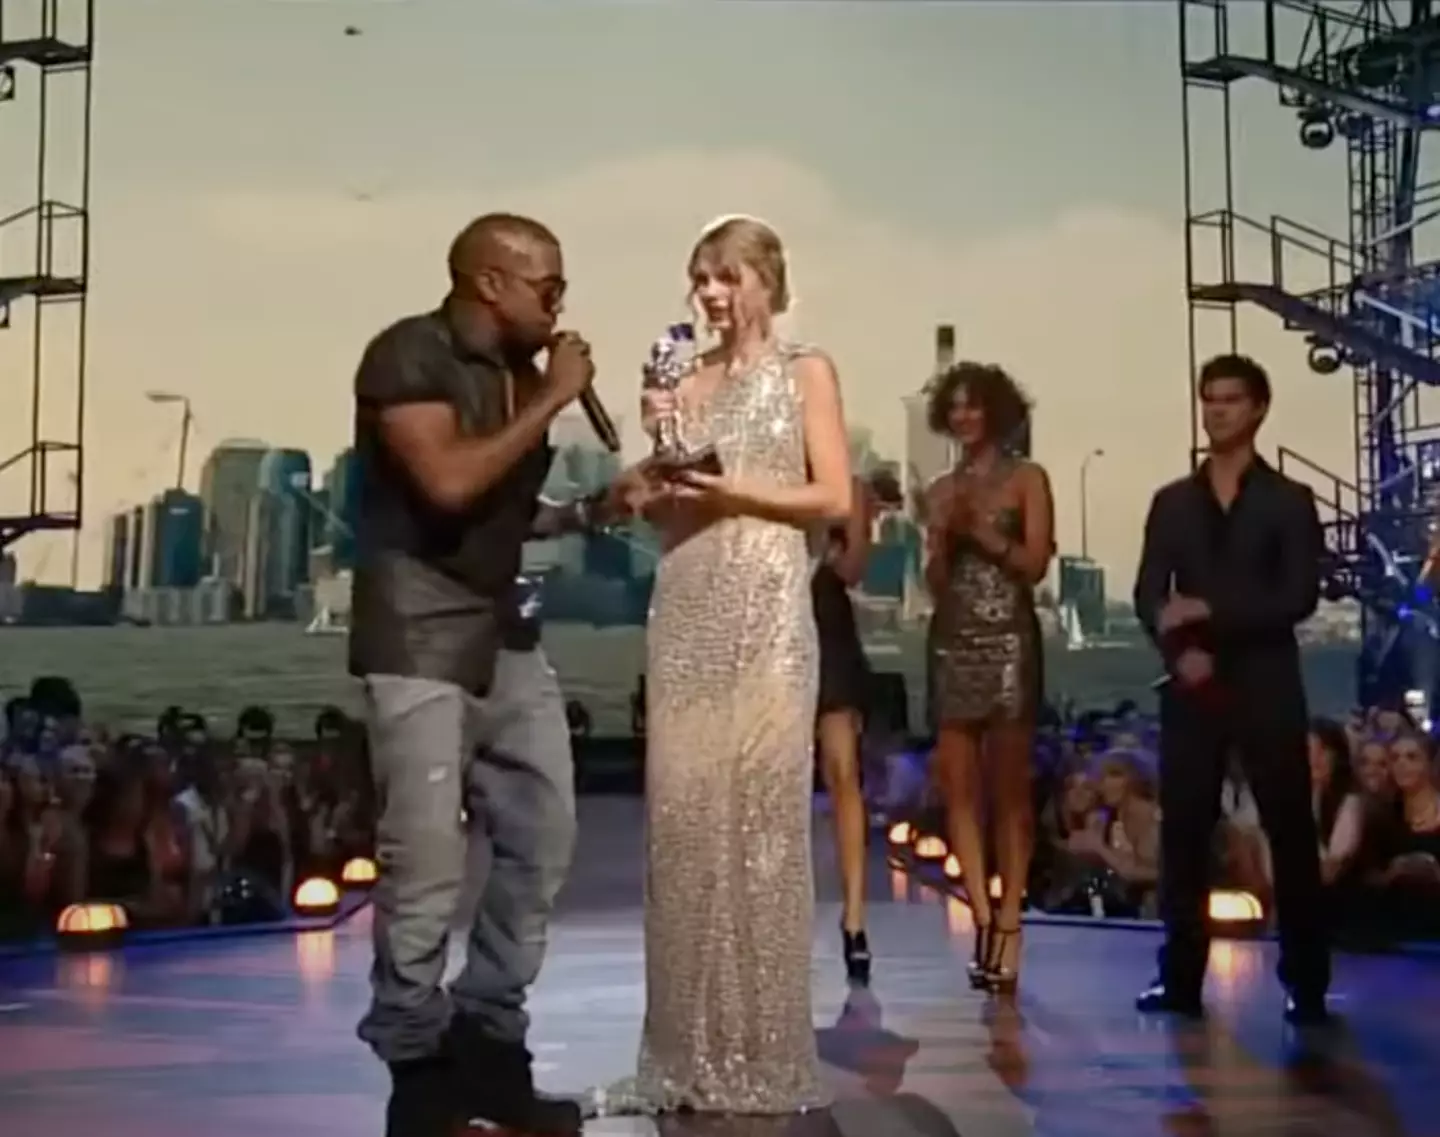 Kanye West interrupted Taylor Swift's acceptance speech at the 2009 MTV Video Music Awards.